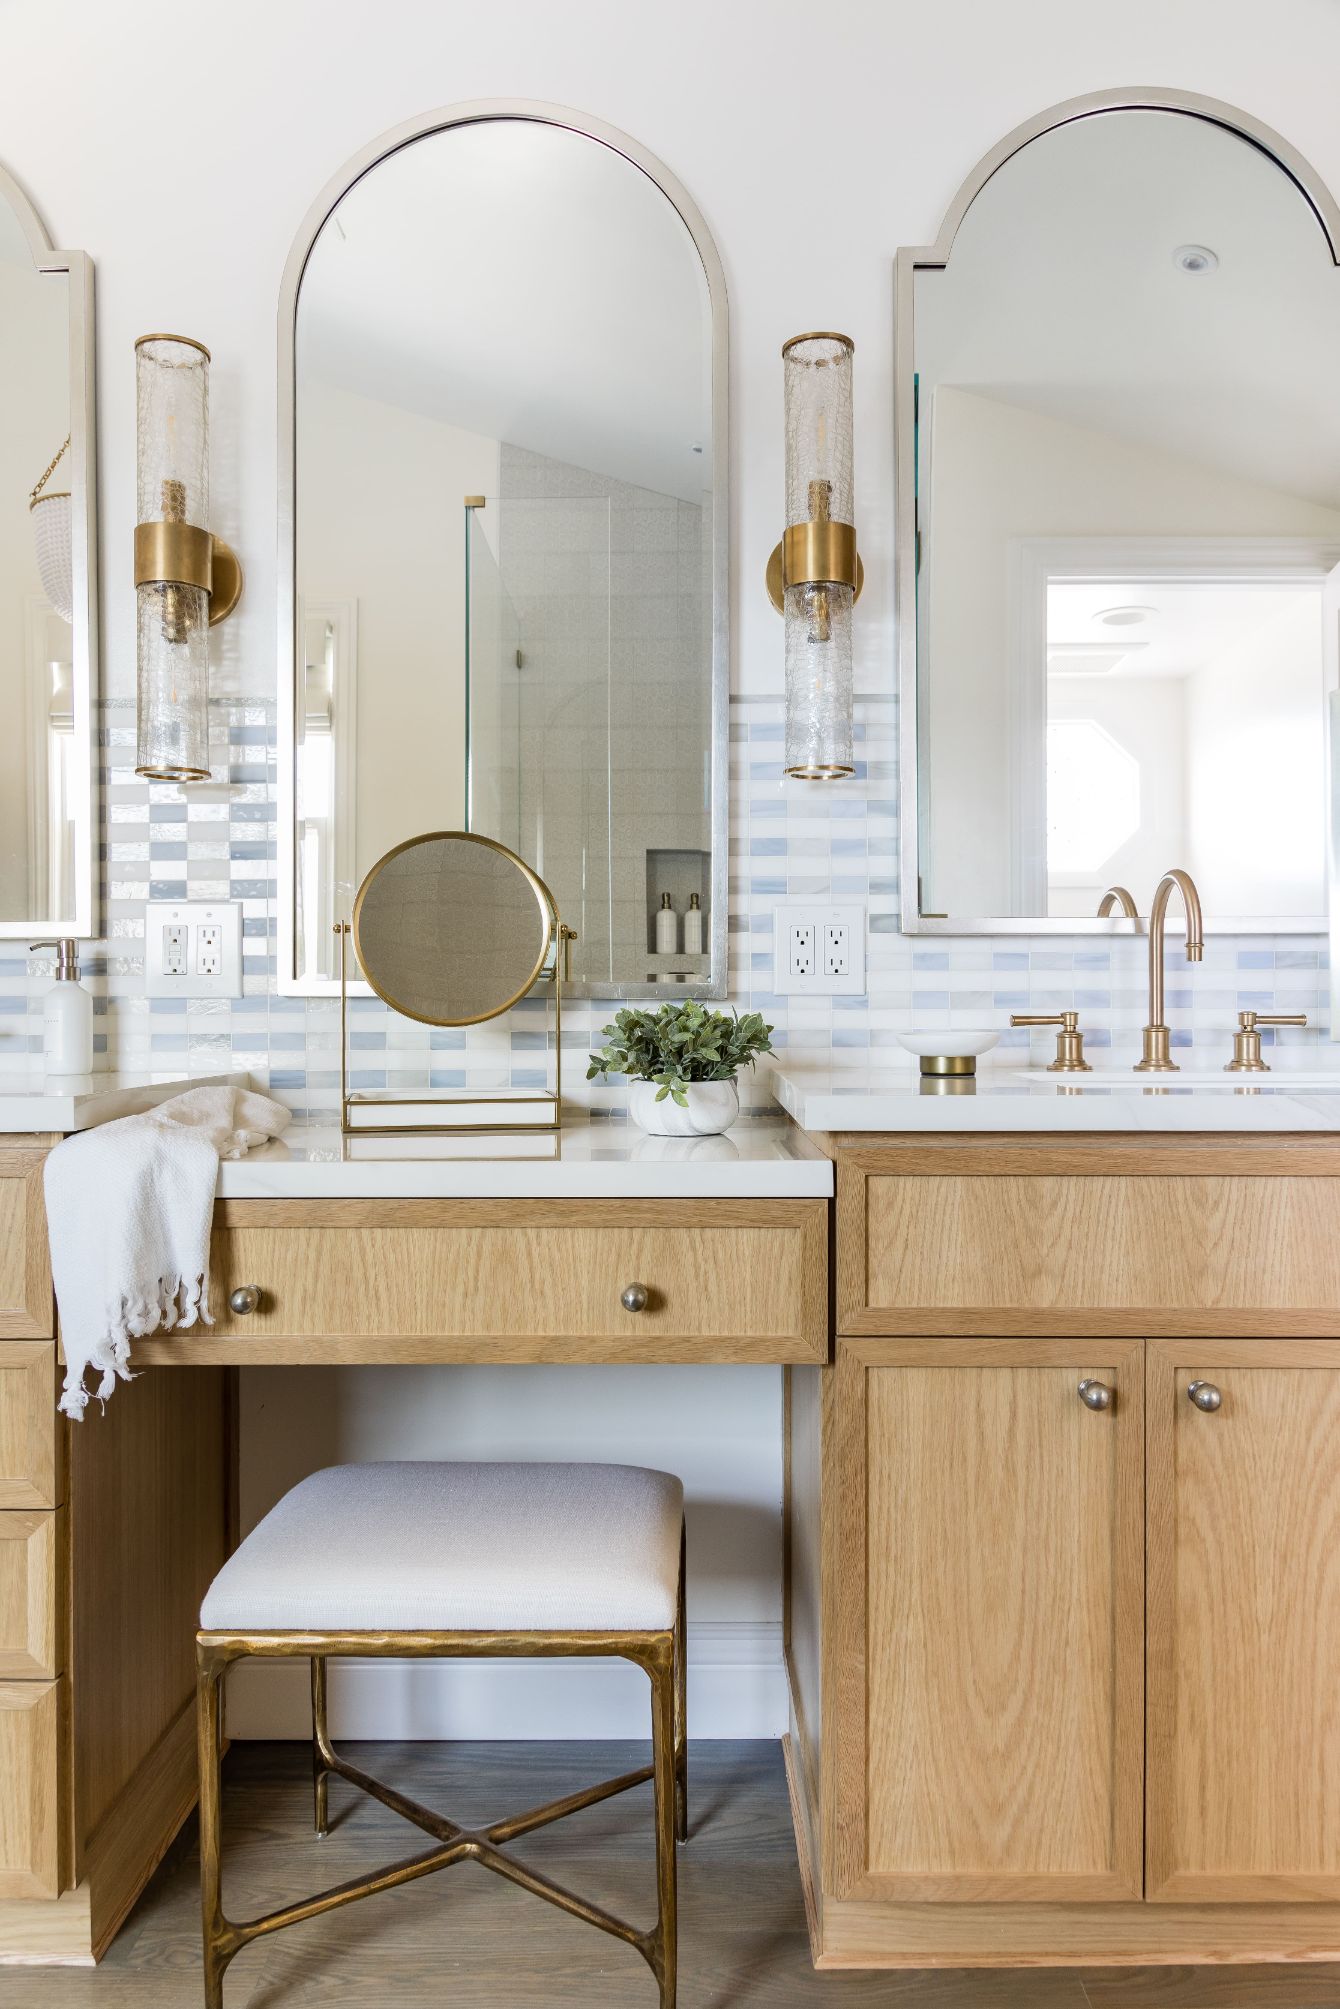 arched mirrors over vanity station in modern bathroom design